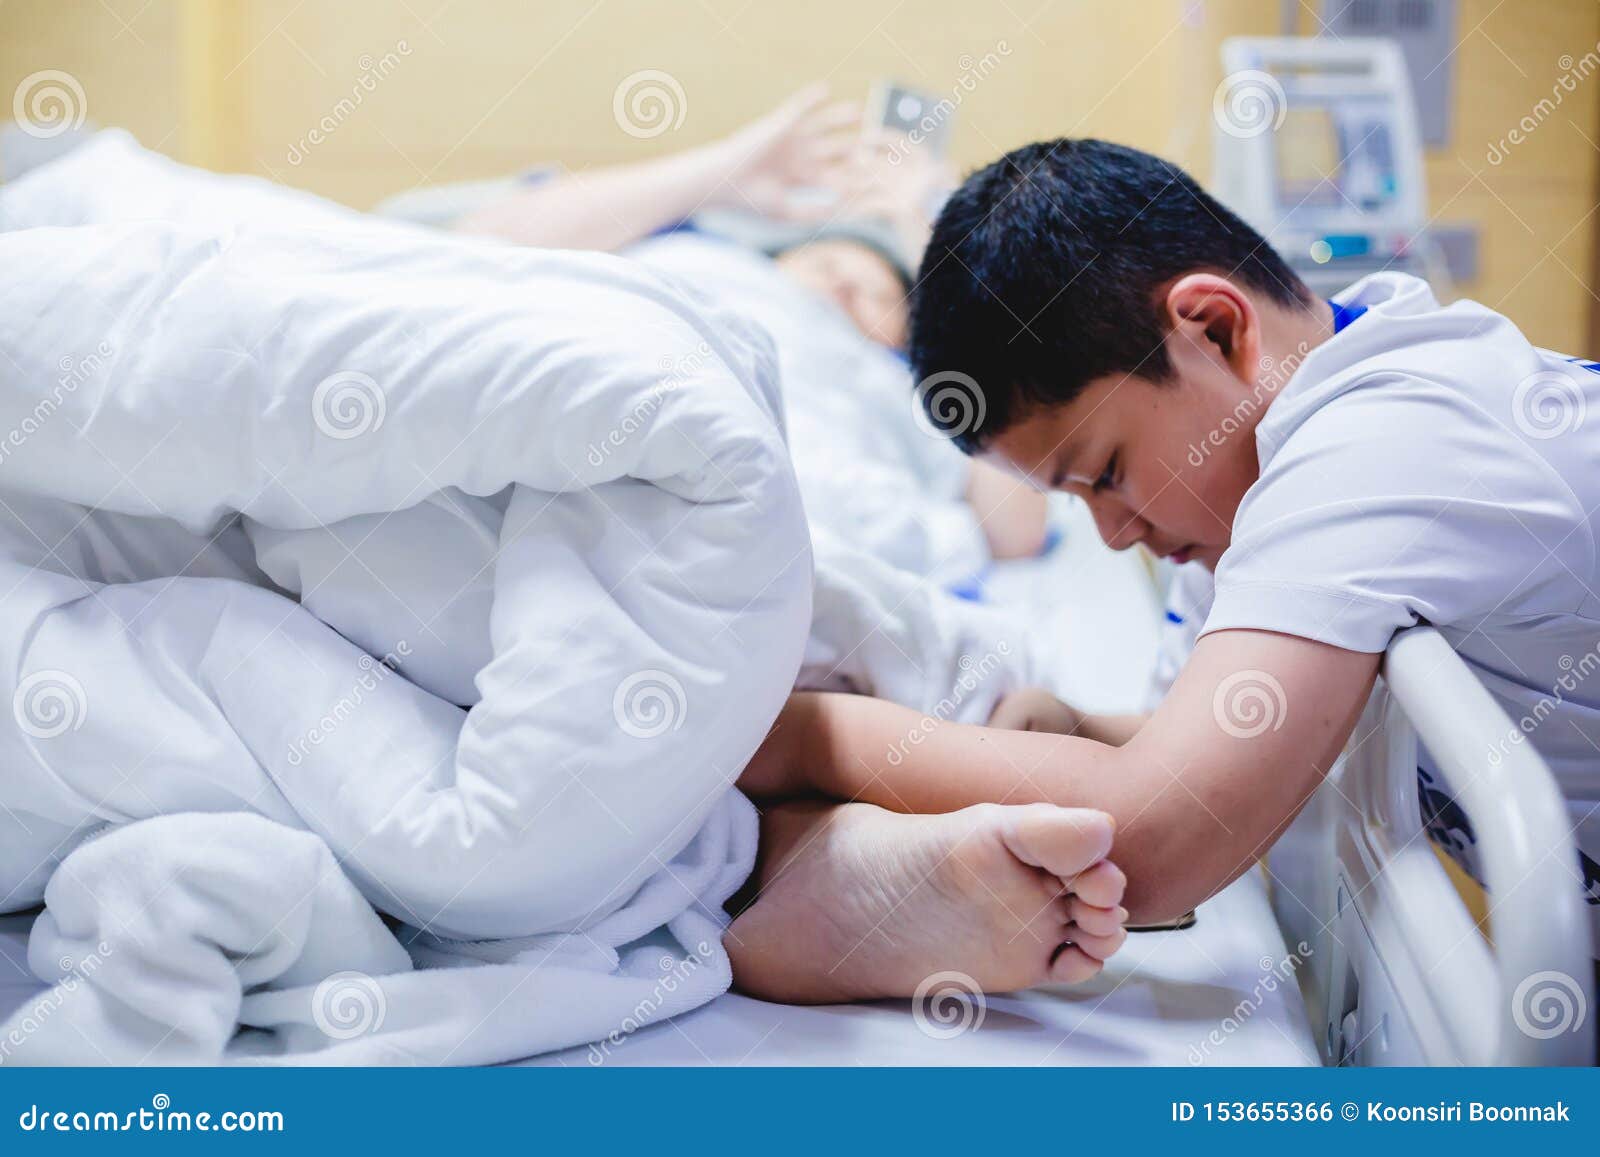 The Son Is Taking Care Of The Sick Mother On The Hospital Bed The Boy